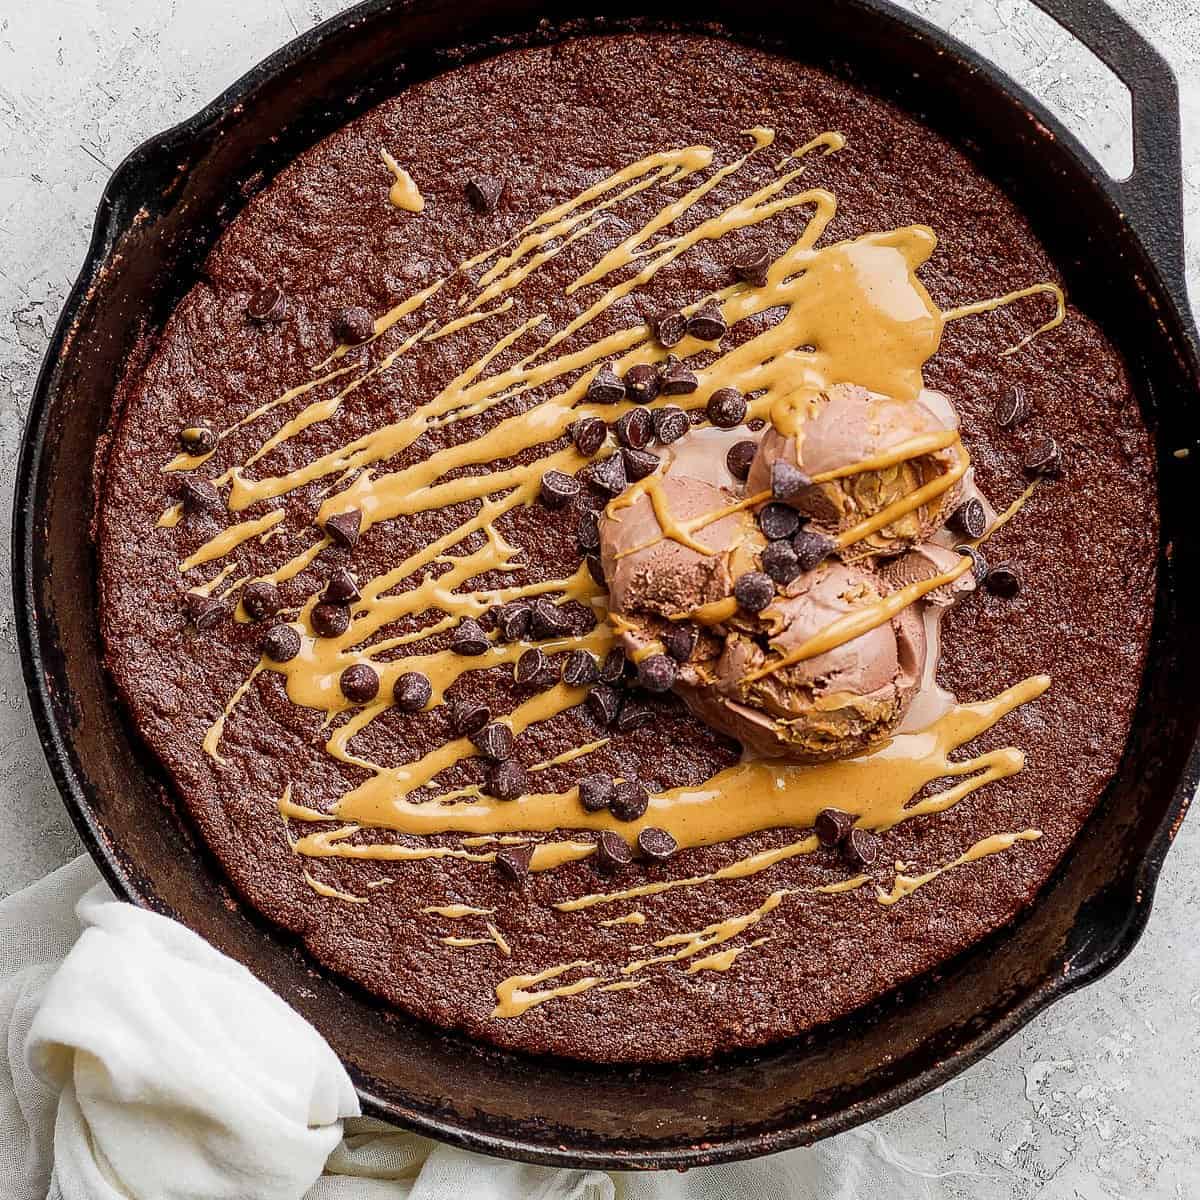 https://fitfoodiefinds.com/wp-content/uploads/2022/02/Flourless-Chocolate-Cake-03sq.jpg